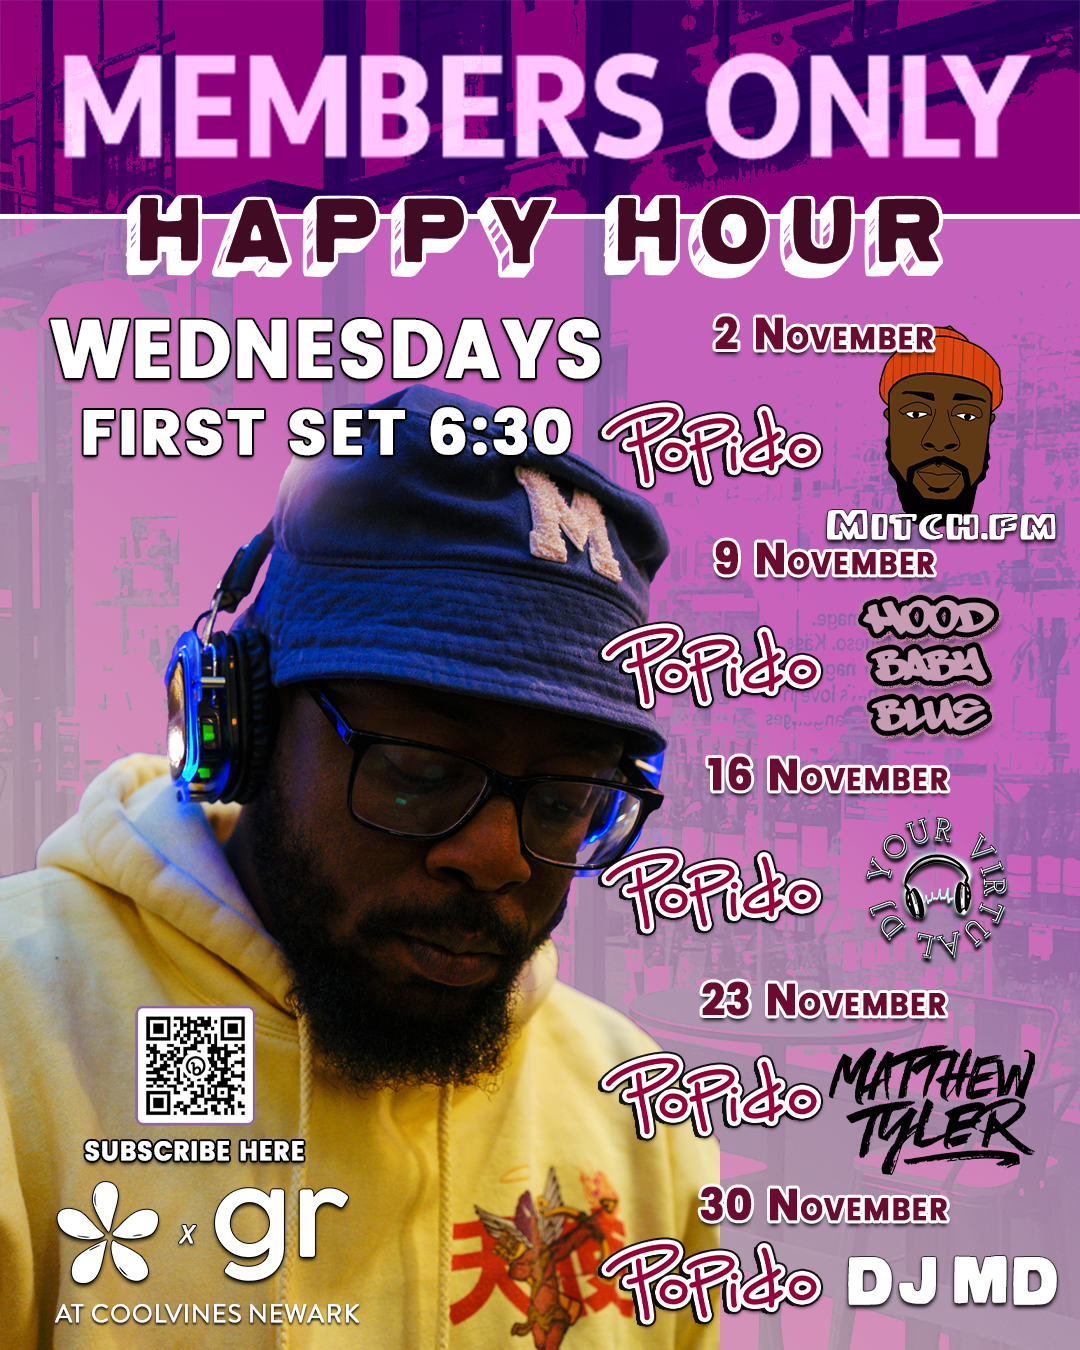 Members only happy hour flyer - Newark First Fridays